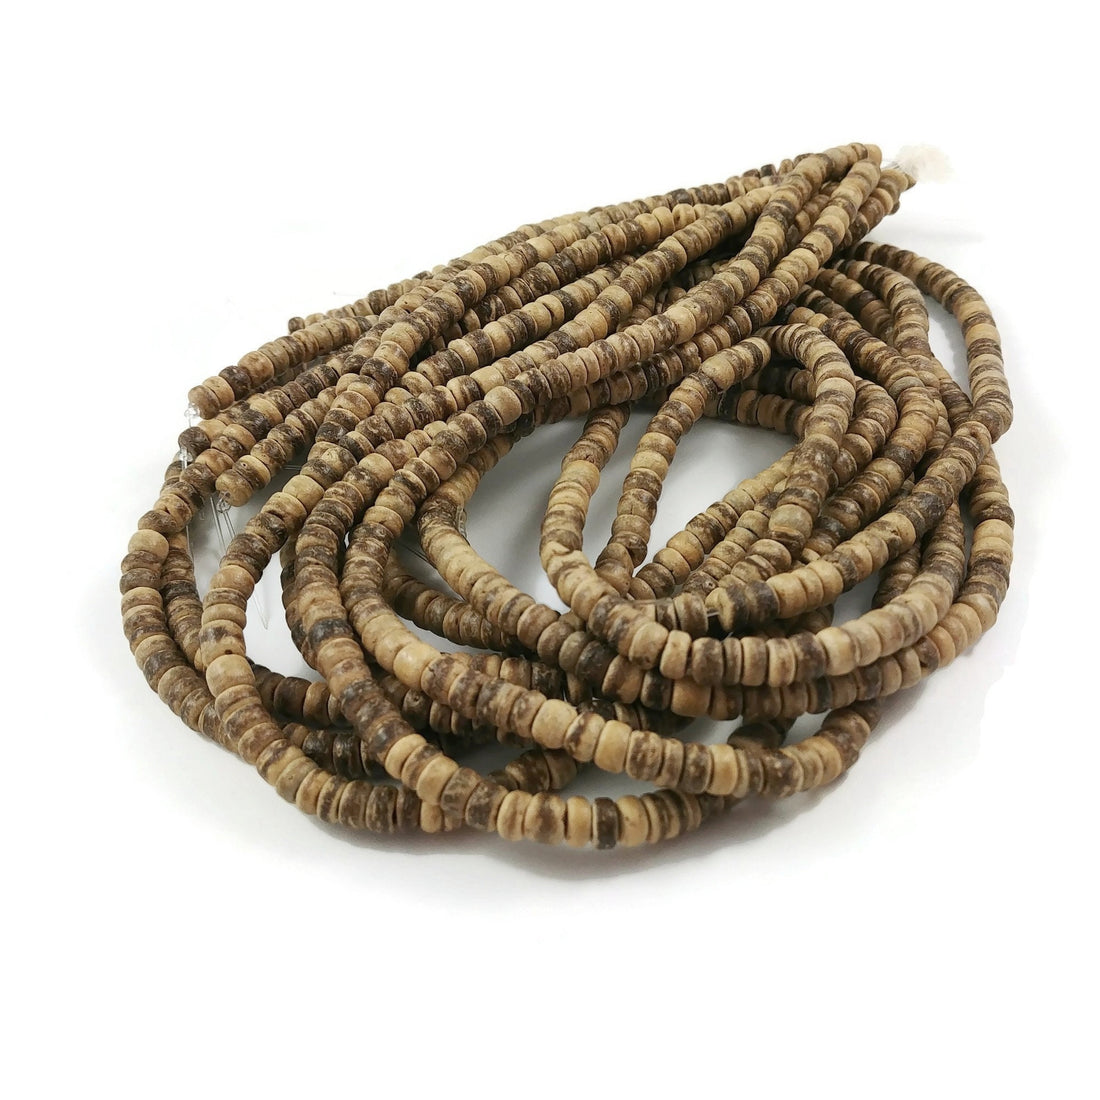 125 natural coconut wood beads, 5mm rondelle heishi beads, Jewelry making spacers